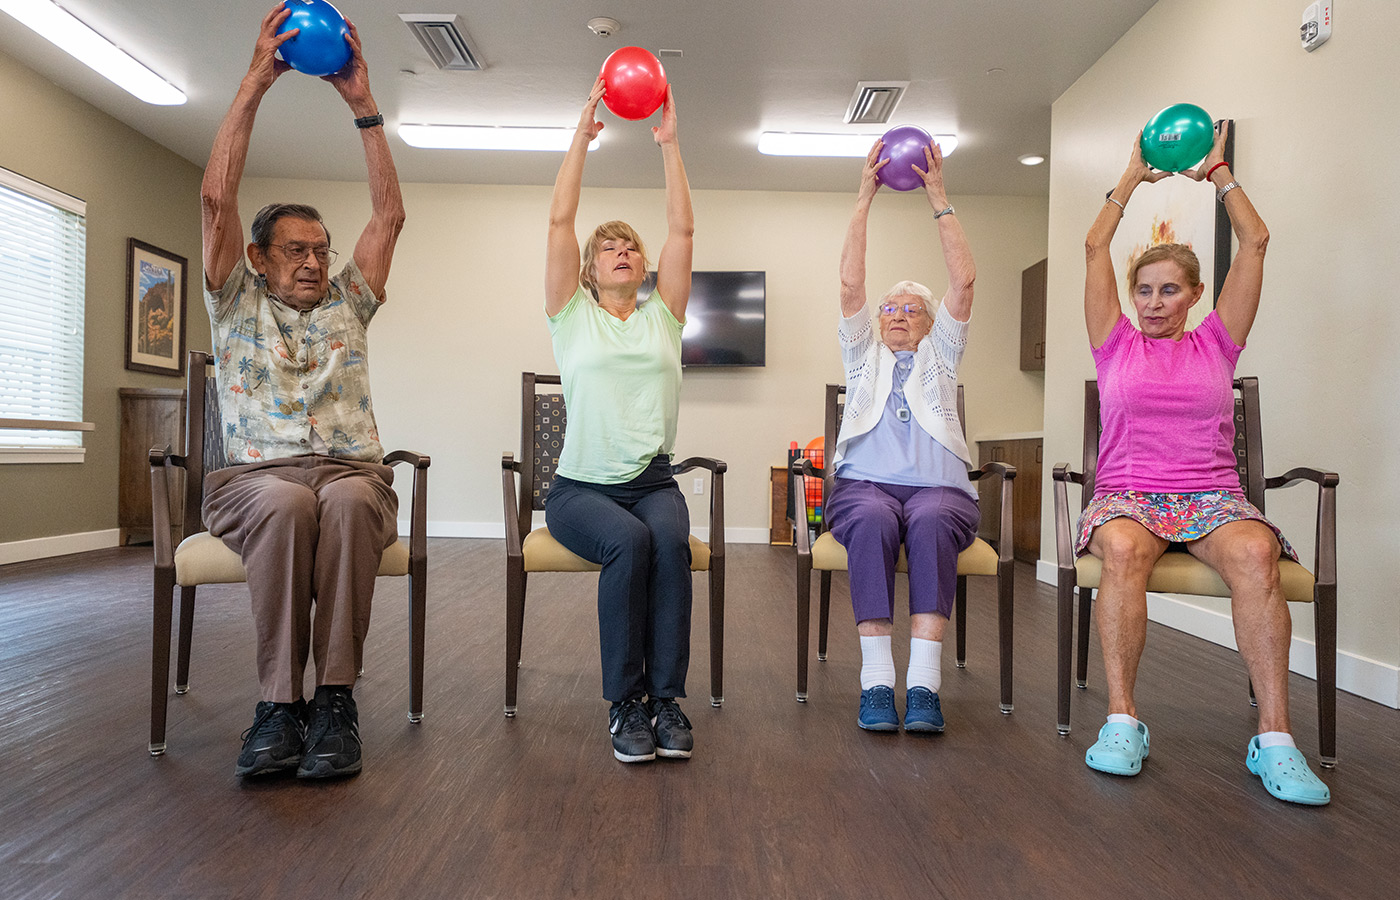 Residents holding balls above their heads in a fitness class